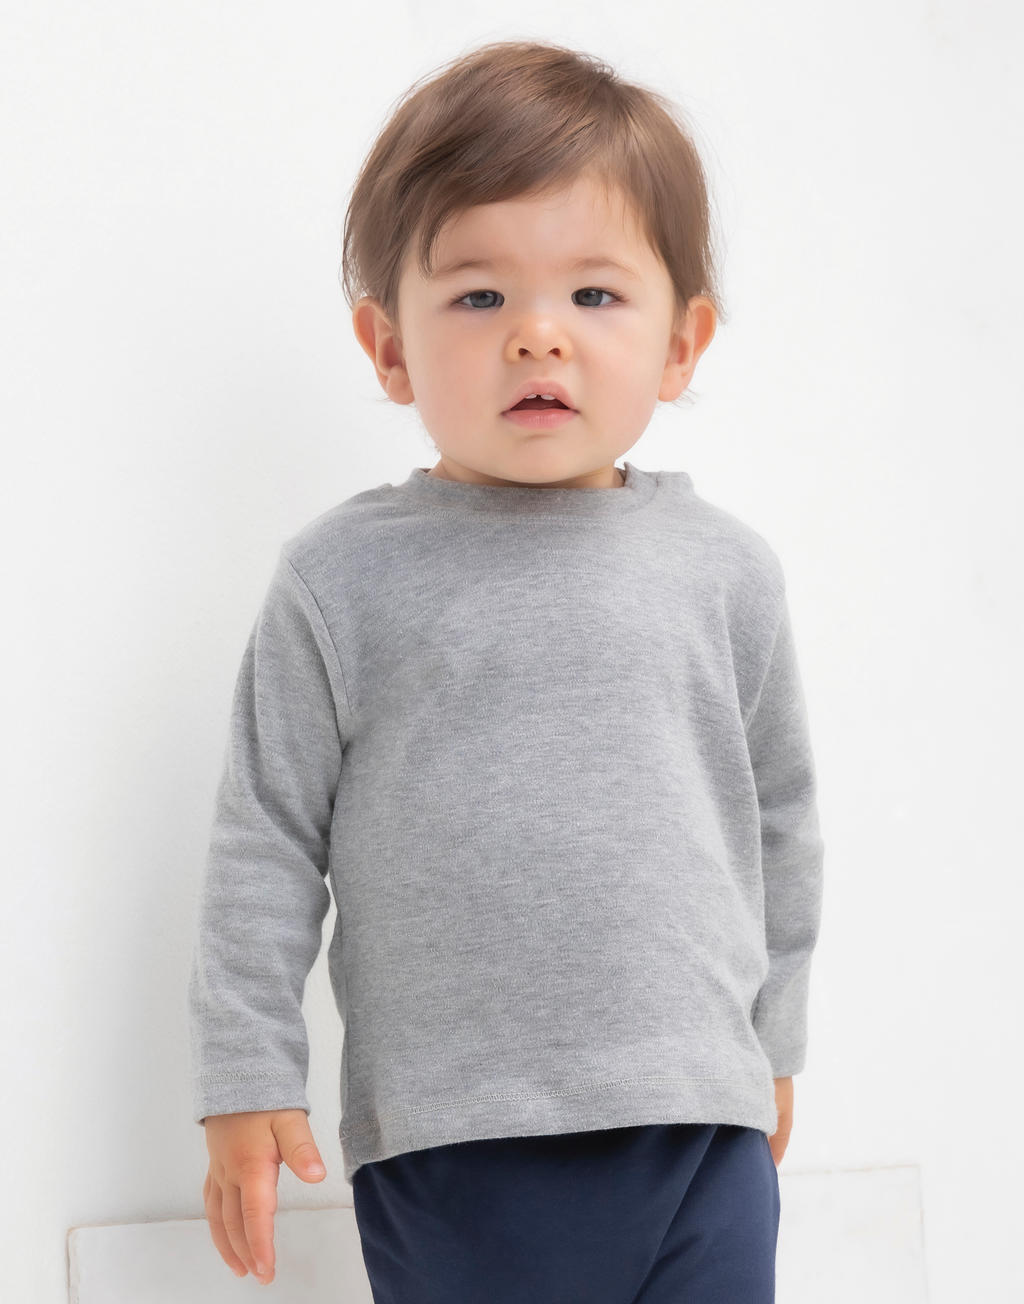  Baby Longsleeve Top in Farbe White